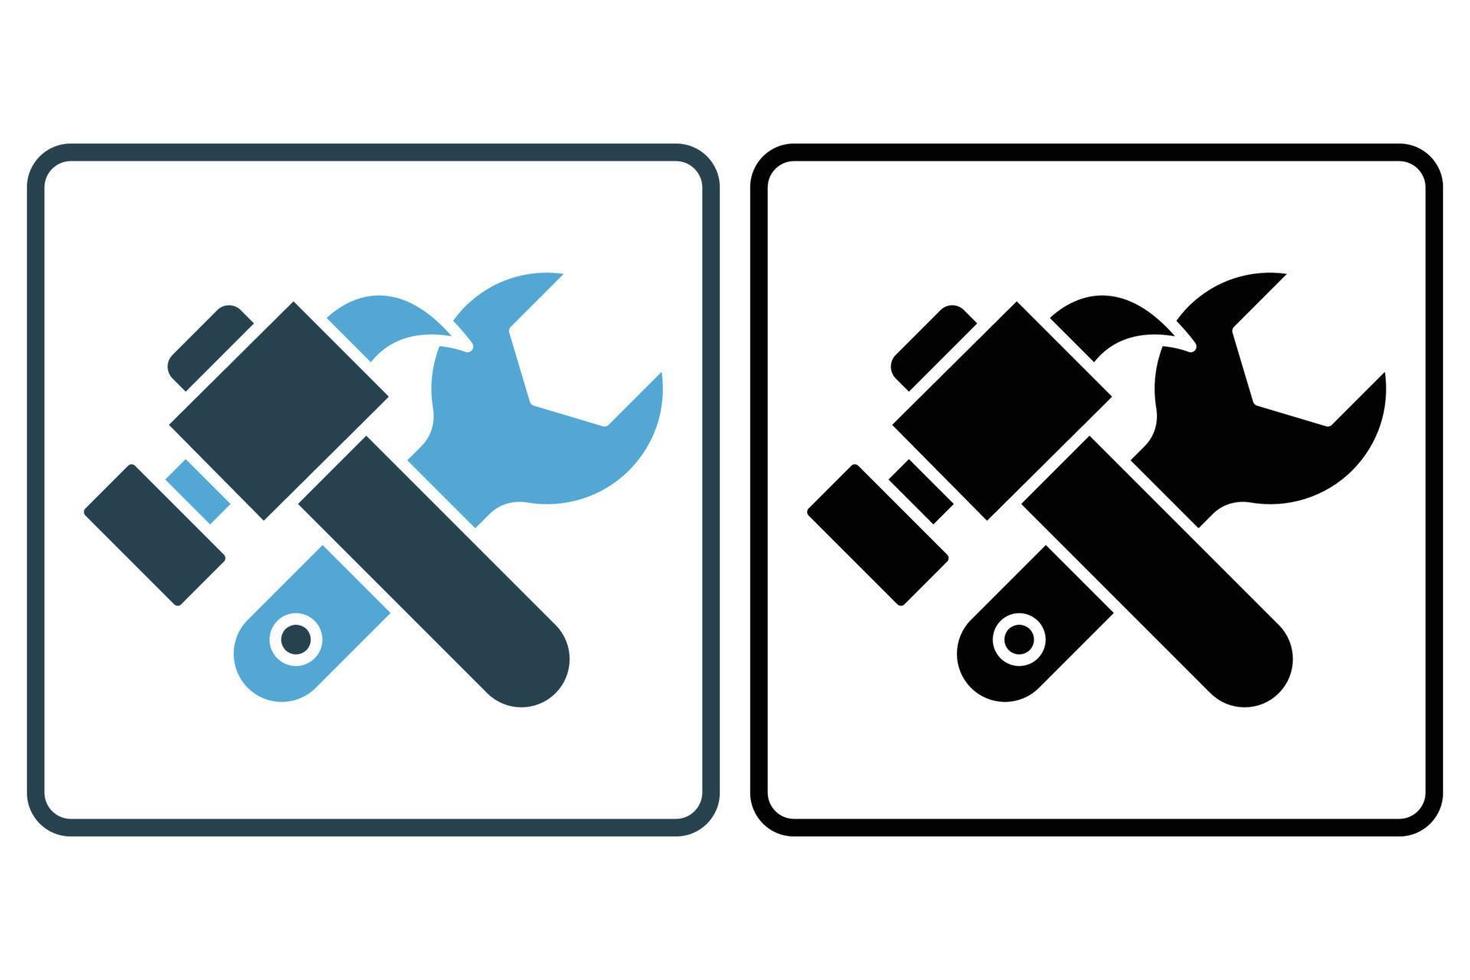 Hammer icon illustration with wrench. icon related to tool. Solid icon style. Simple vector design editable